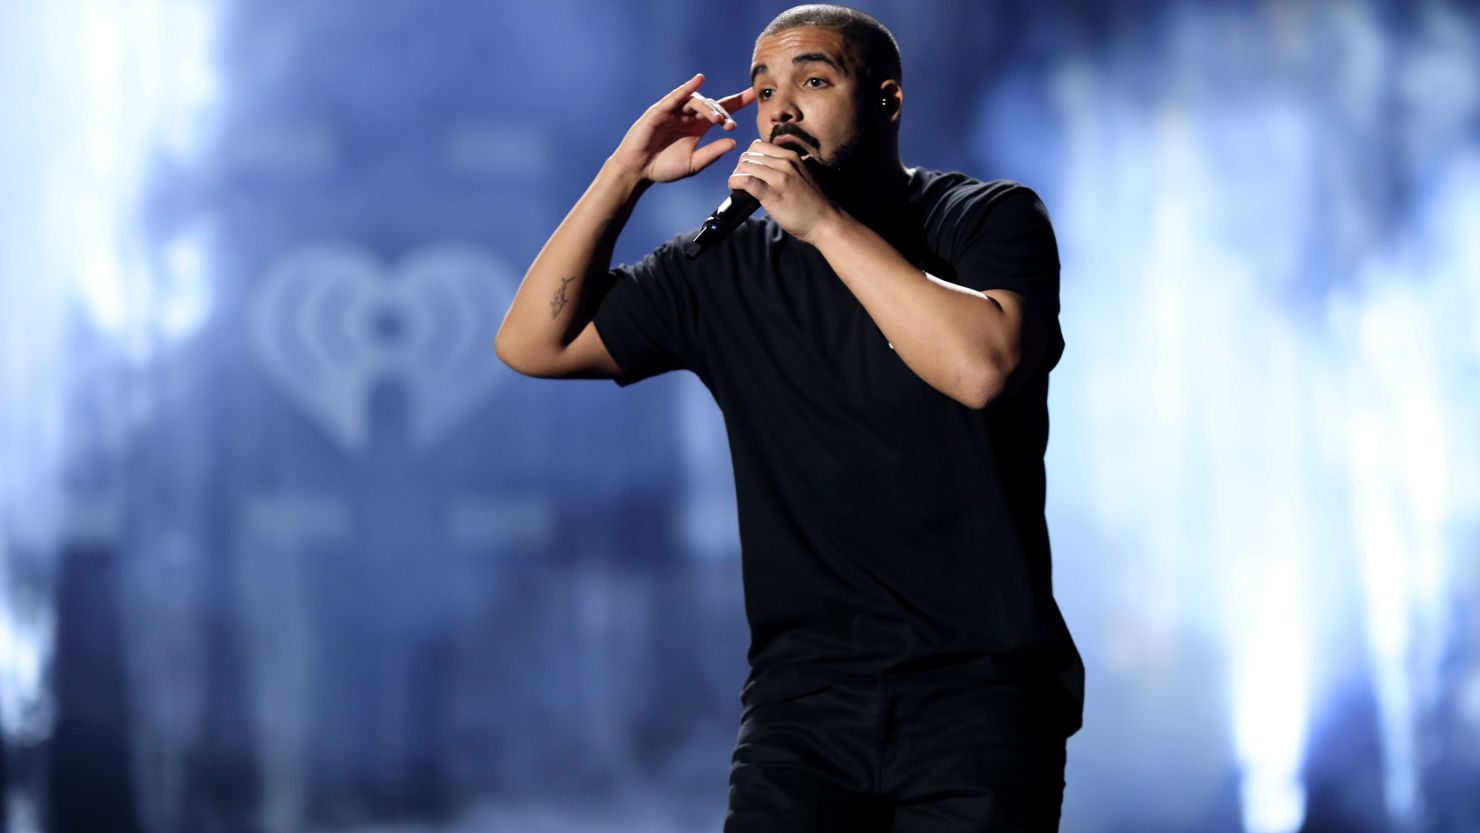 A woman was arrested recently for allegedly breaking into Drake's house.